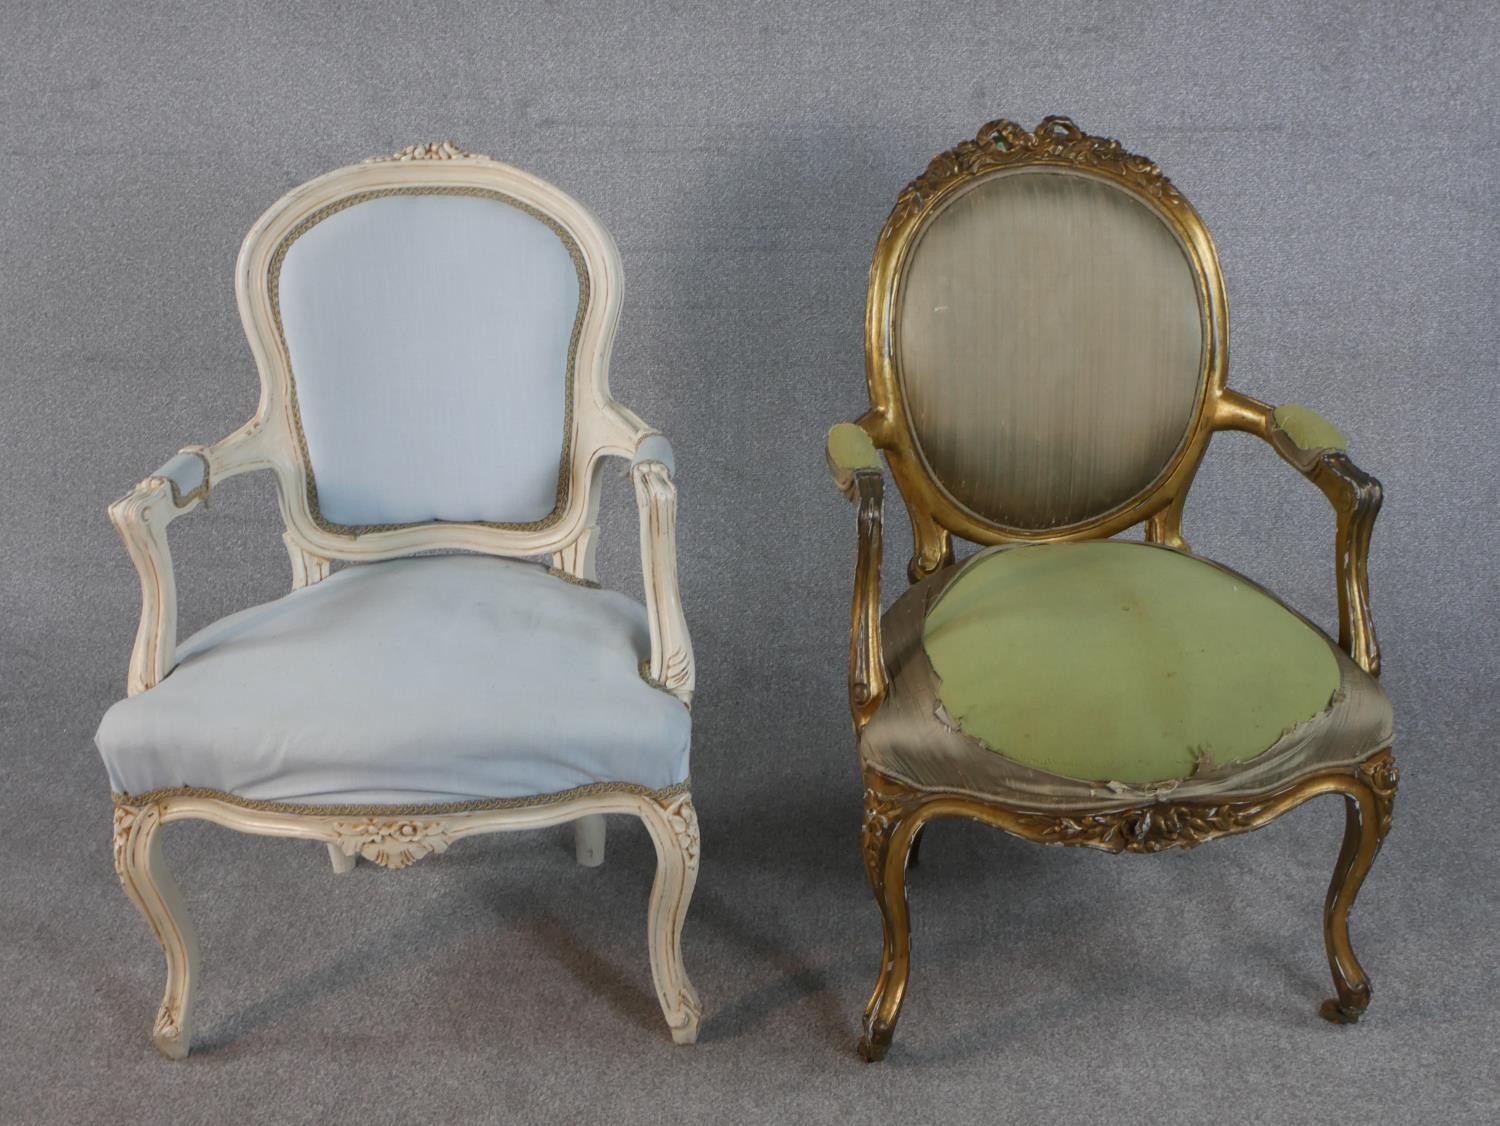 Two French Louis XV style fauteuil armchairs, one gilded and upholstered in silk (upholstery